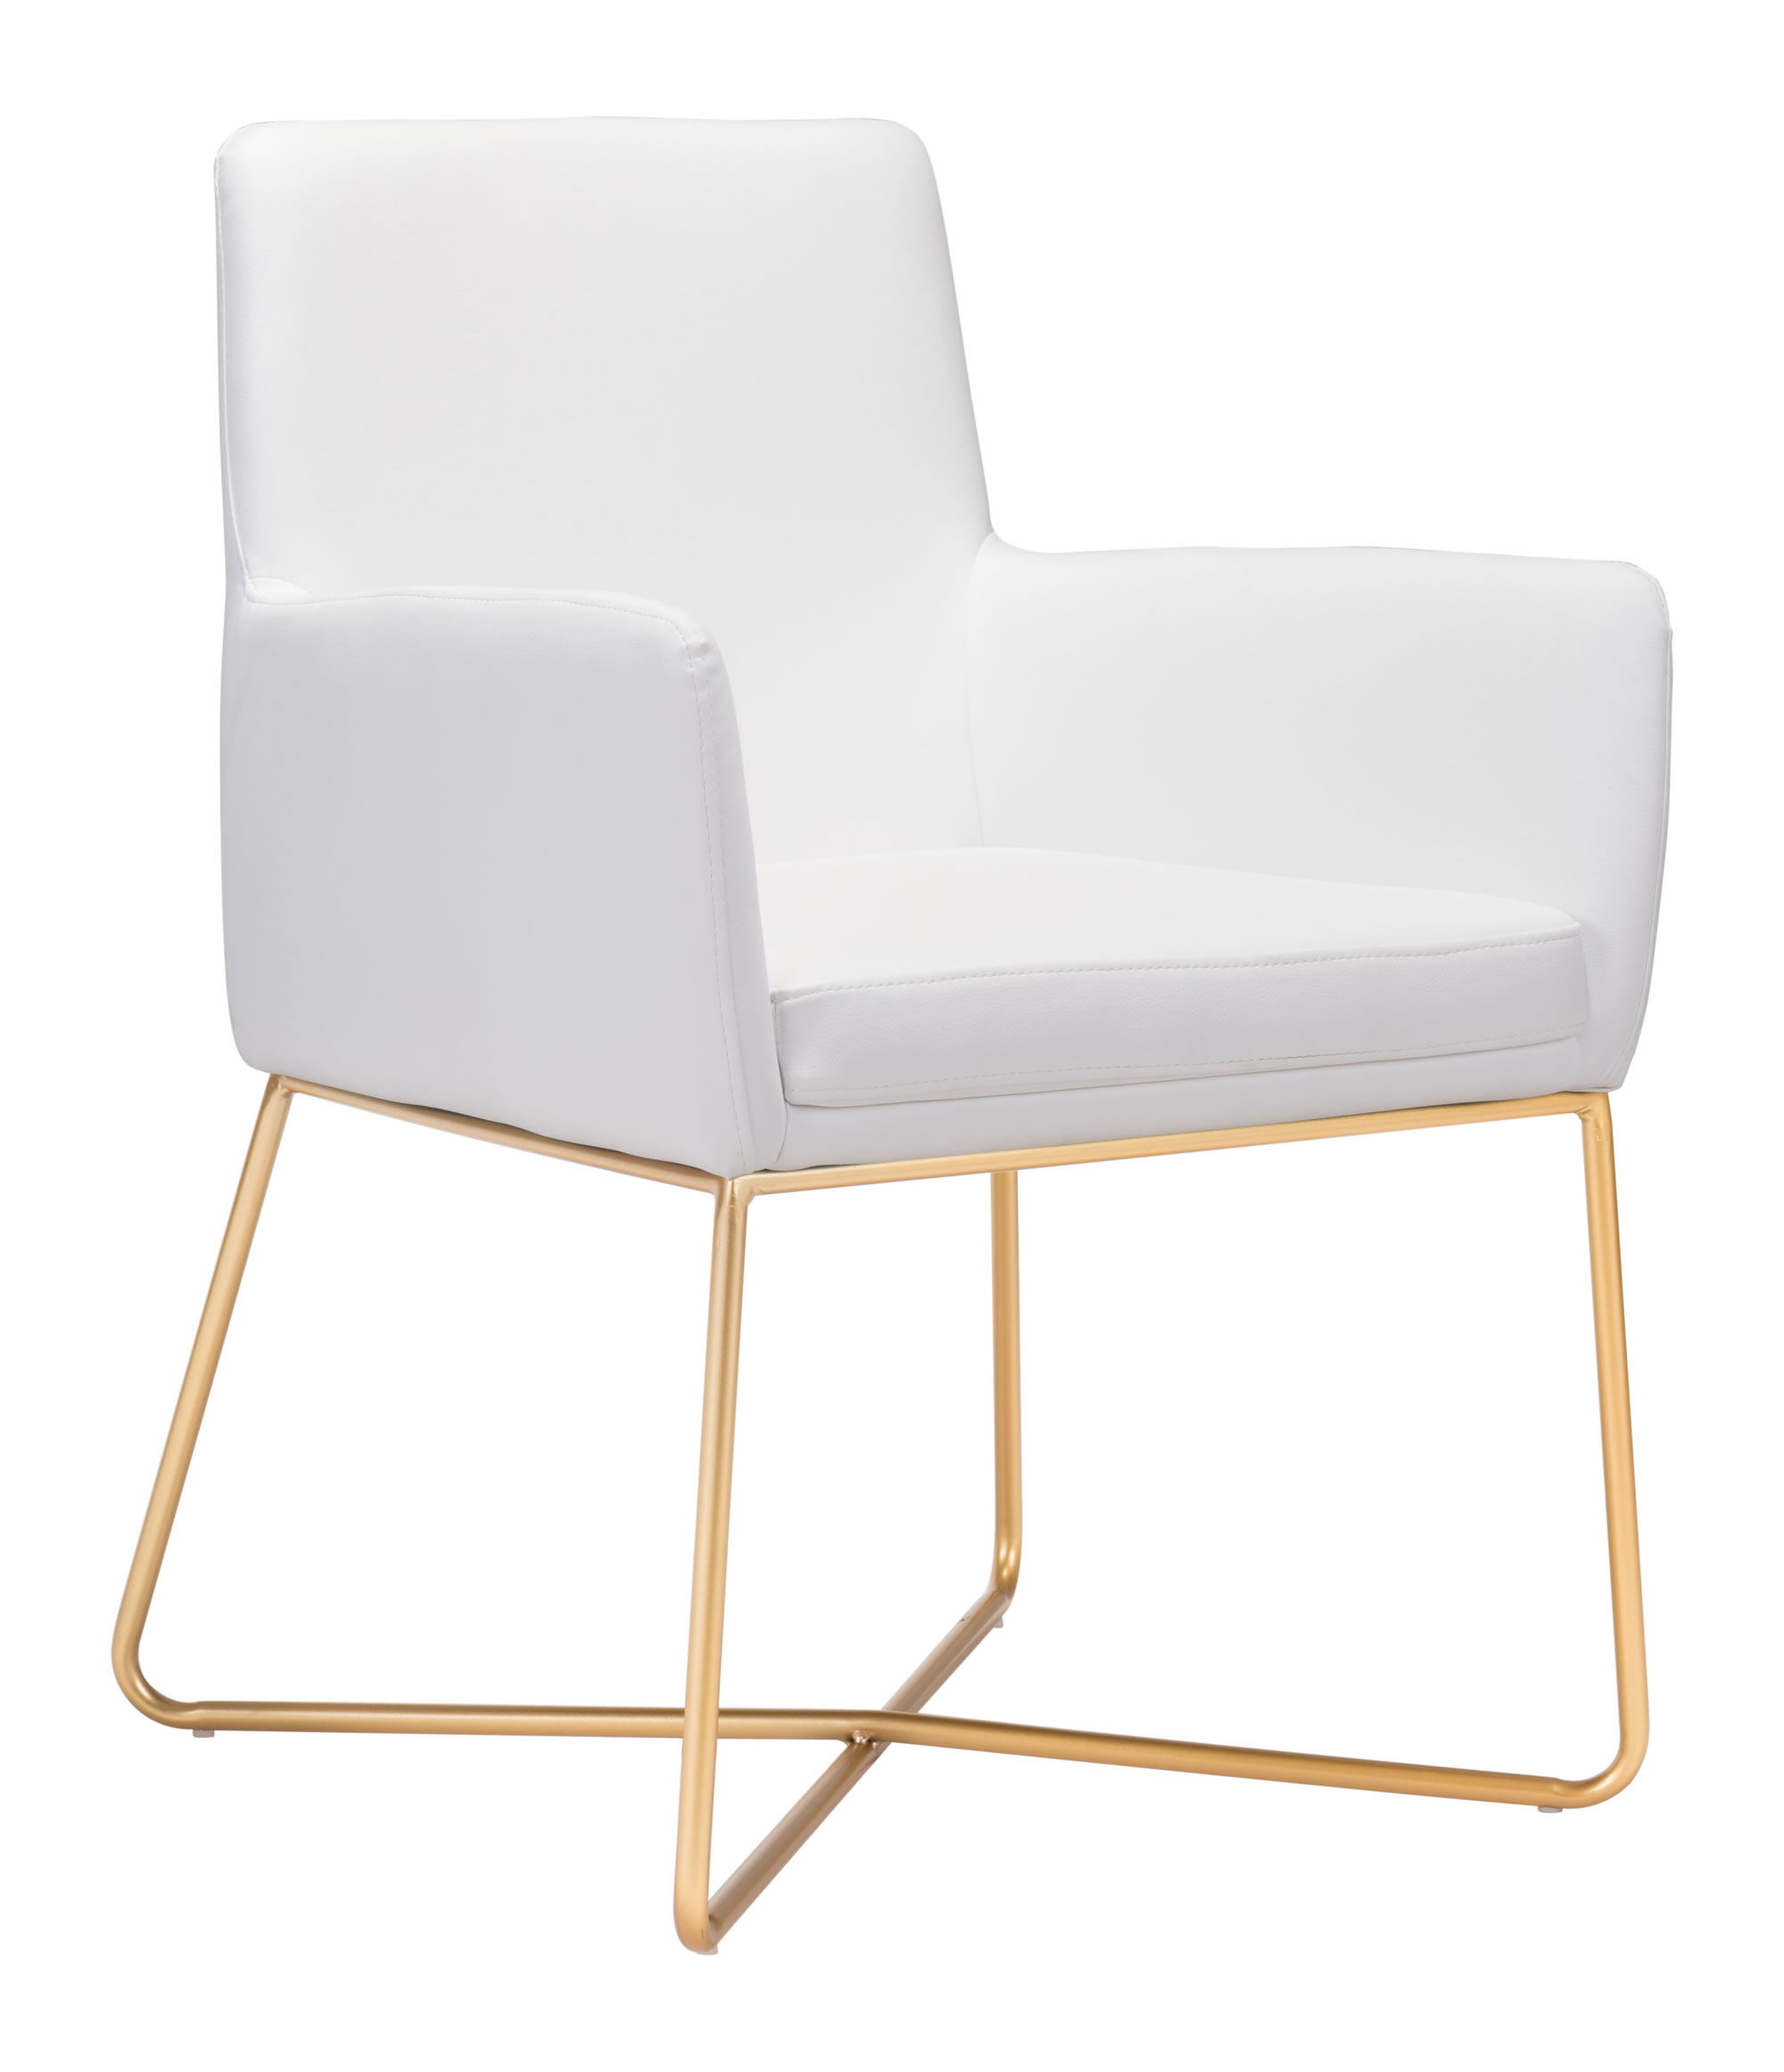 24.4" x 24.8" x 33.9" White, Leatherette, Painted Metal, Arm Chair